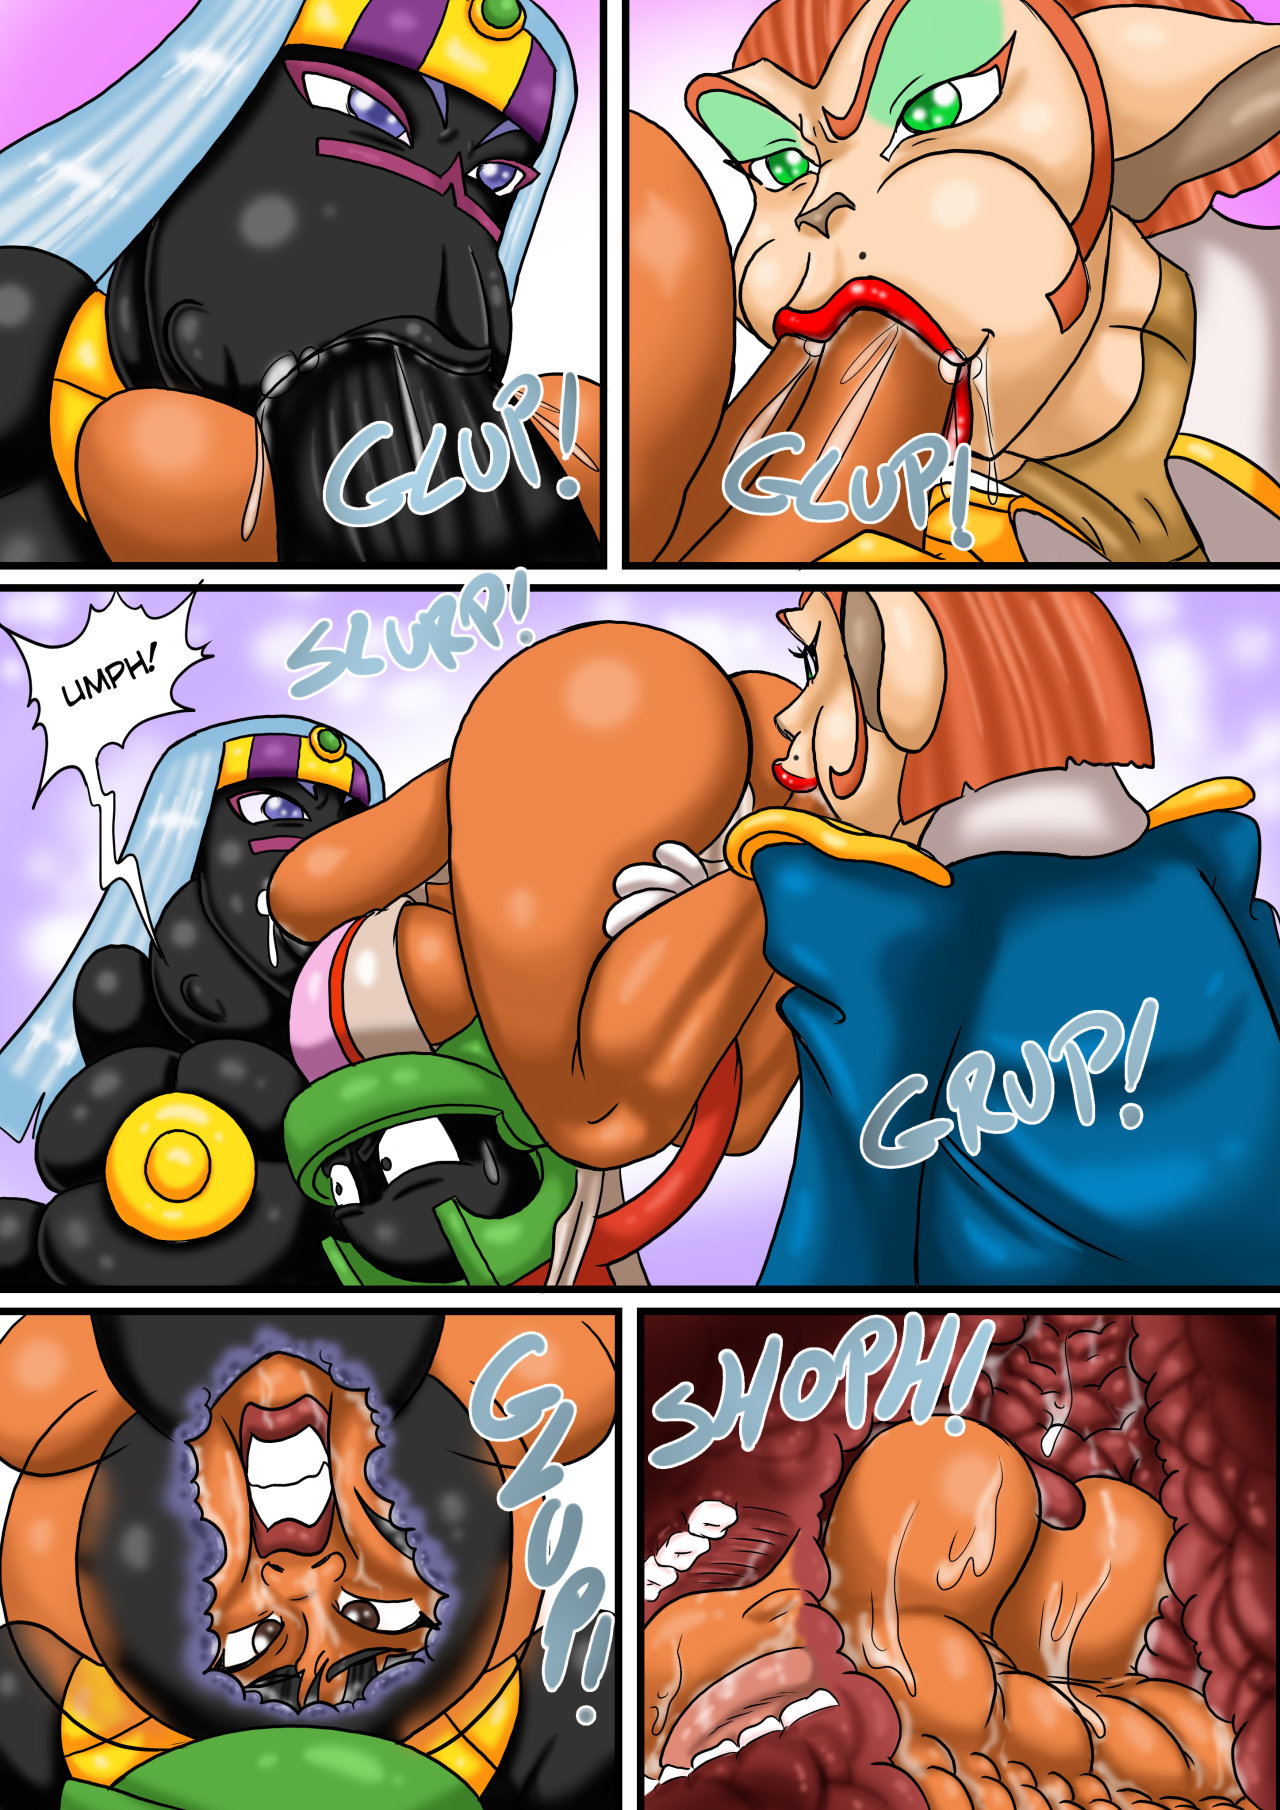 NATSUMEMETALSONIC VORE IN DEEP SPACE VARIOUS ONGOING PARTE 2 - 2